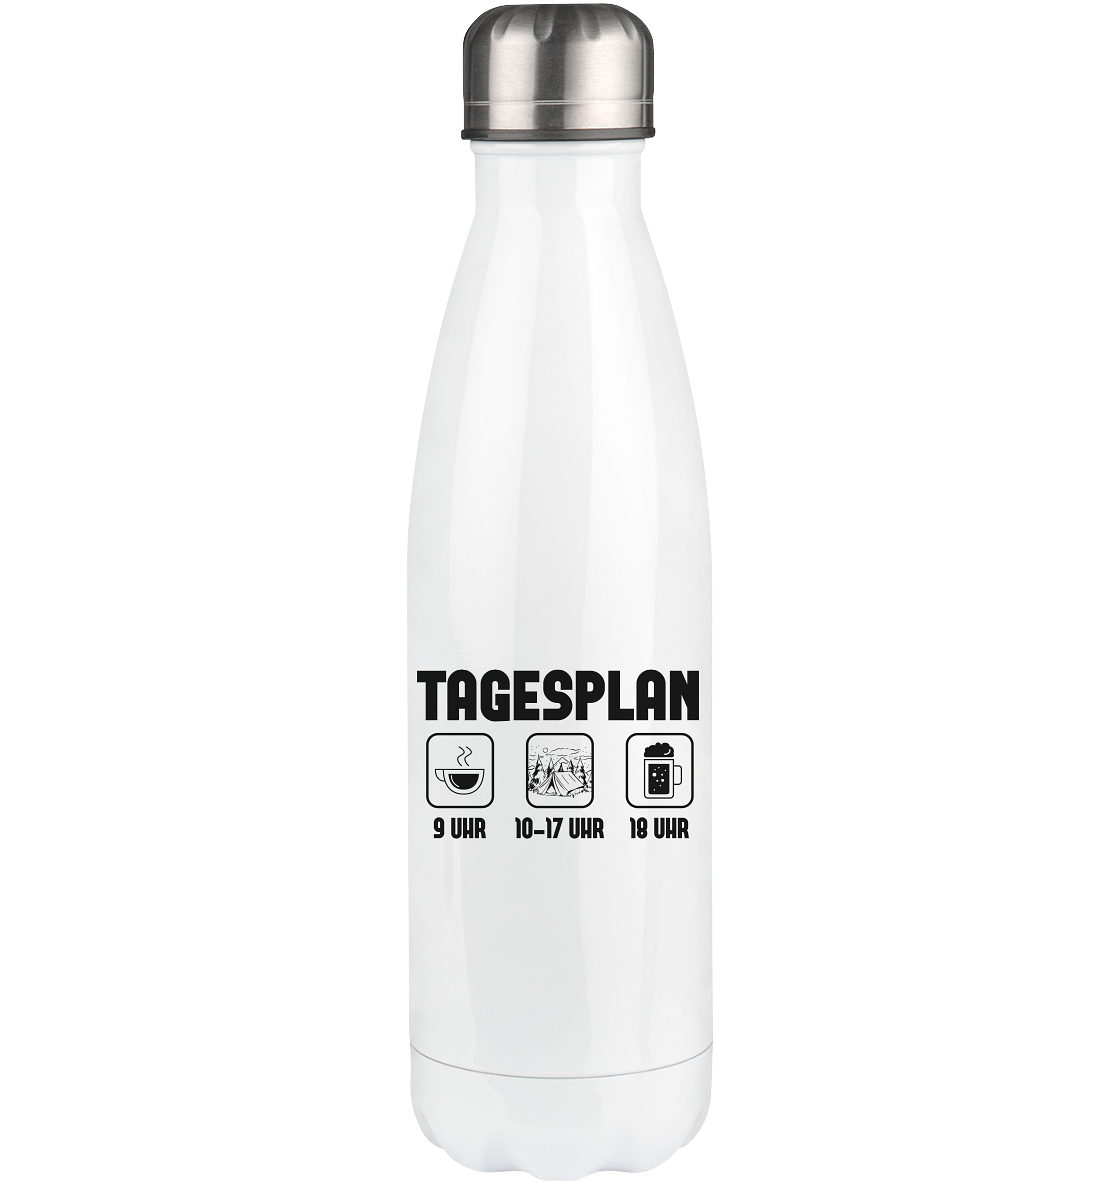 Tagesplan 1 - Edelstahl Thermosflasche camping UONP 500ml